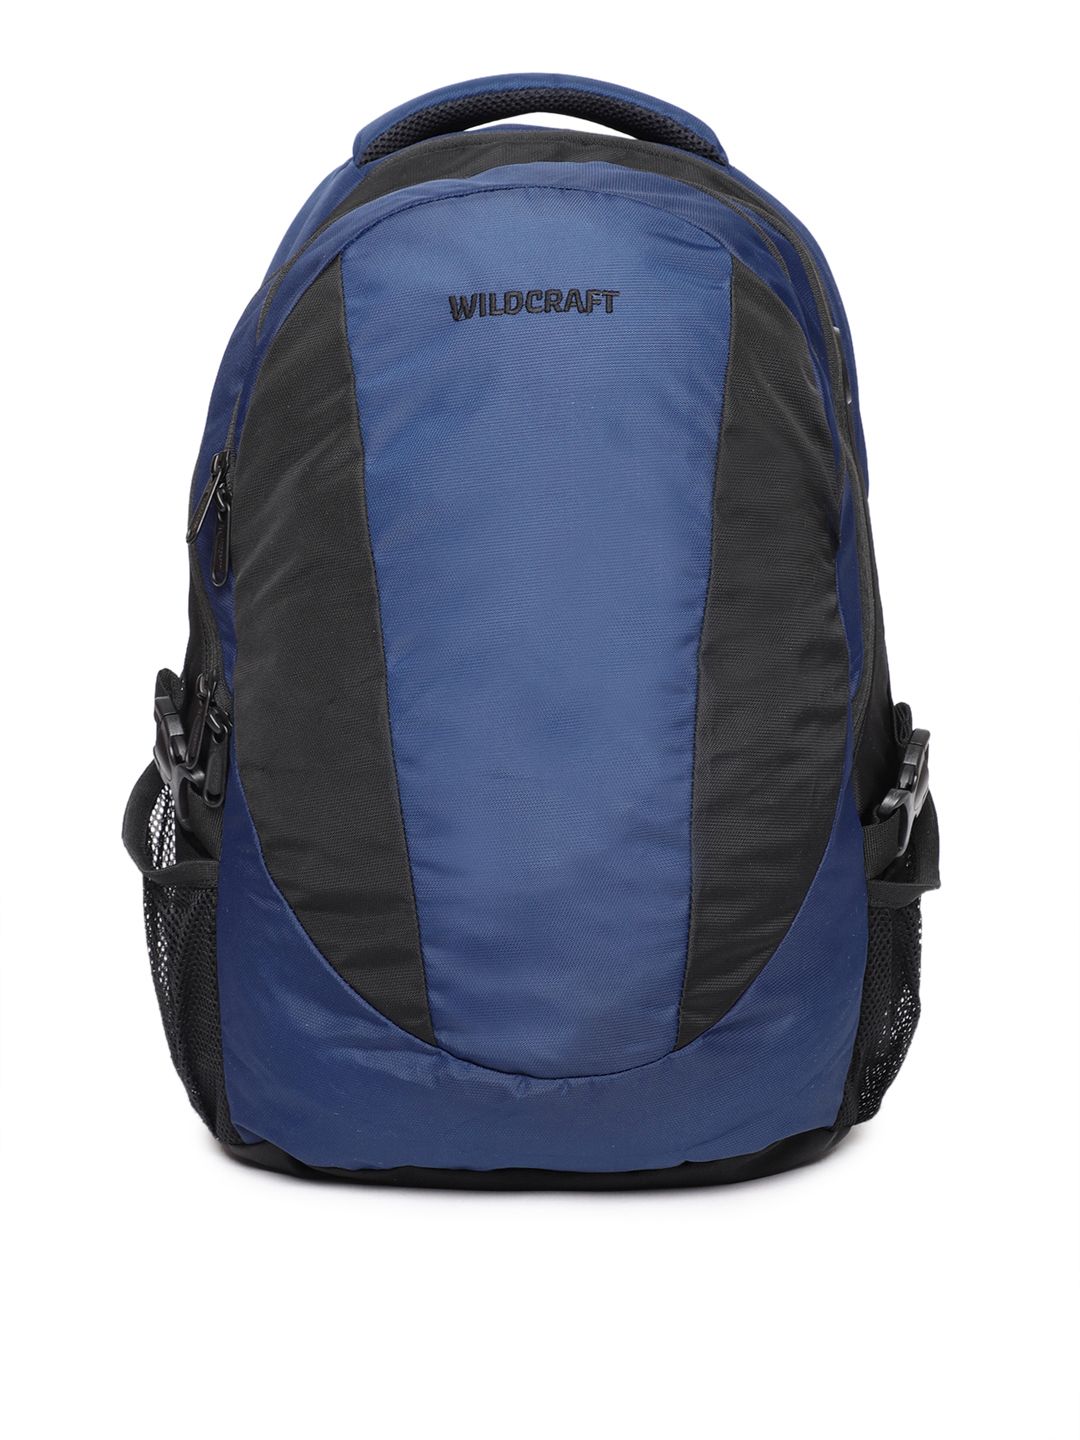 Wildcraft Unisex Navy Blue Solid Backpack Price in India